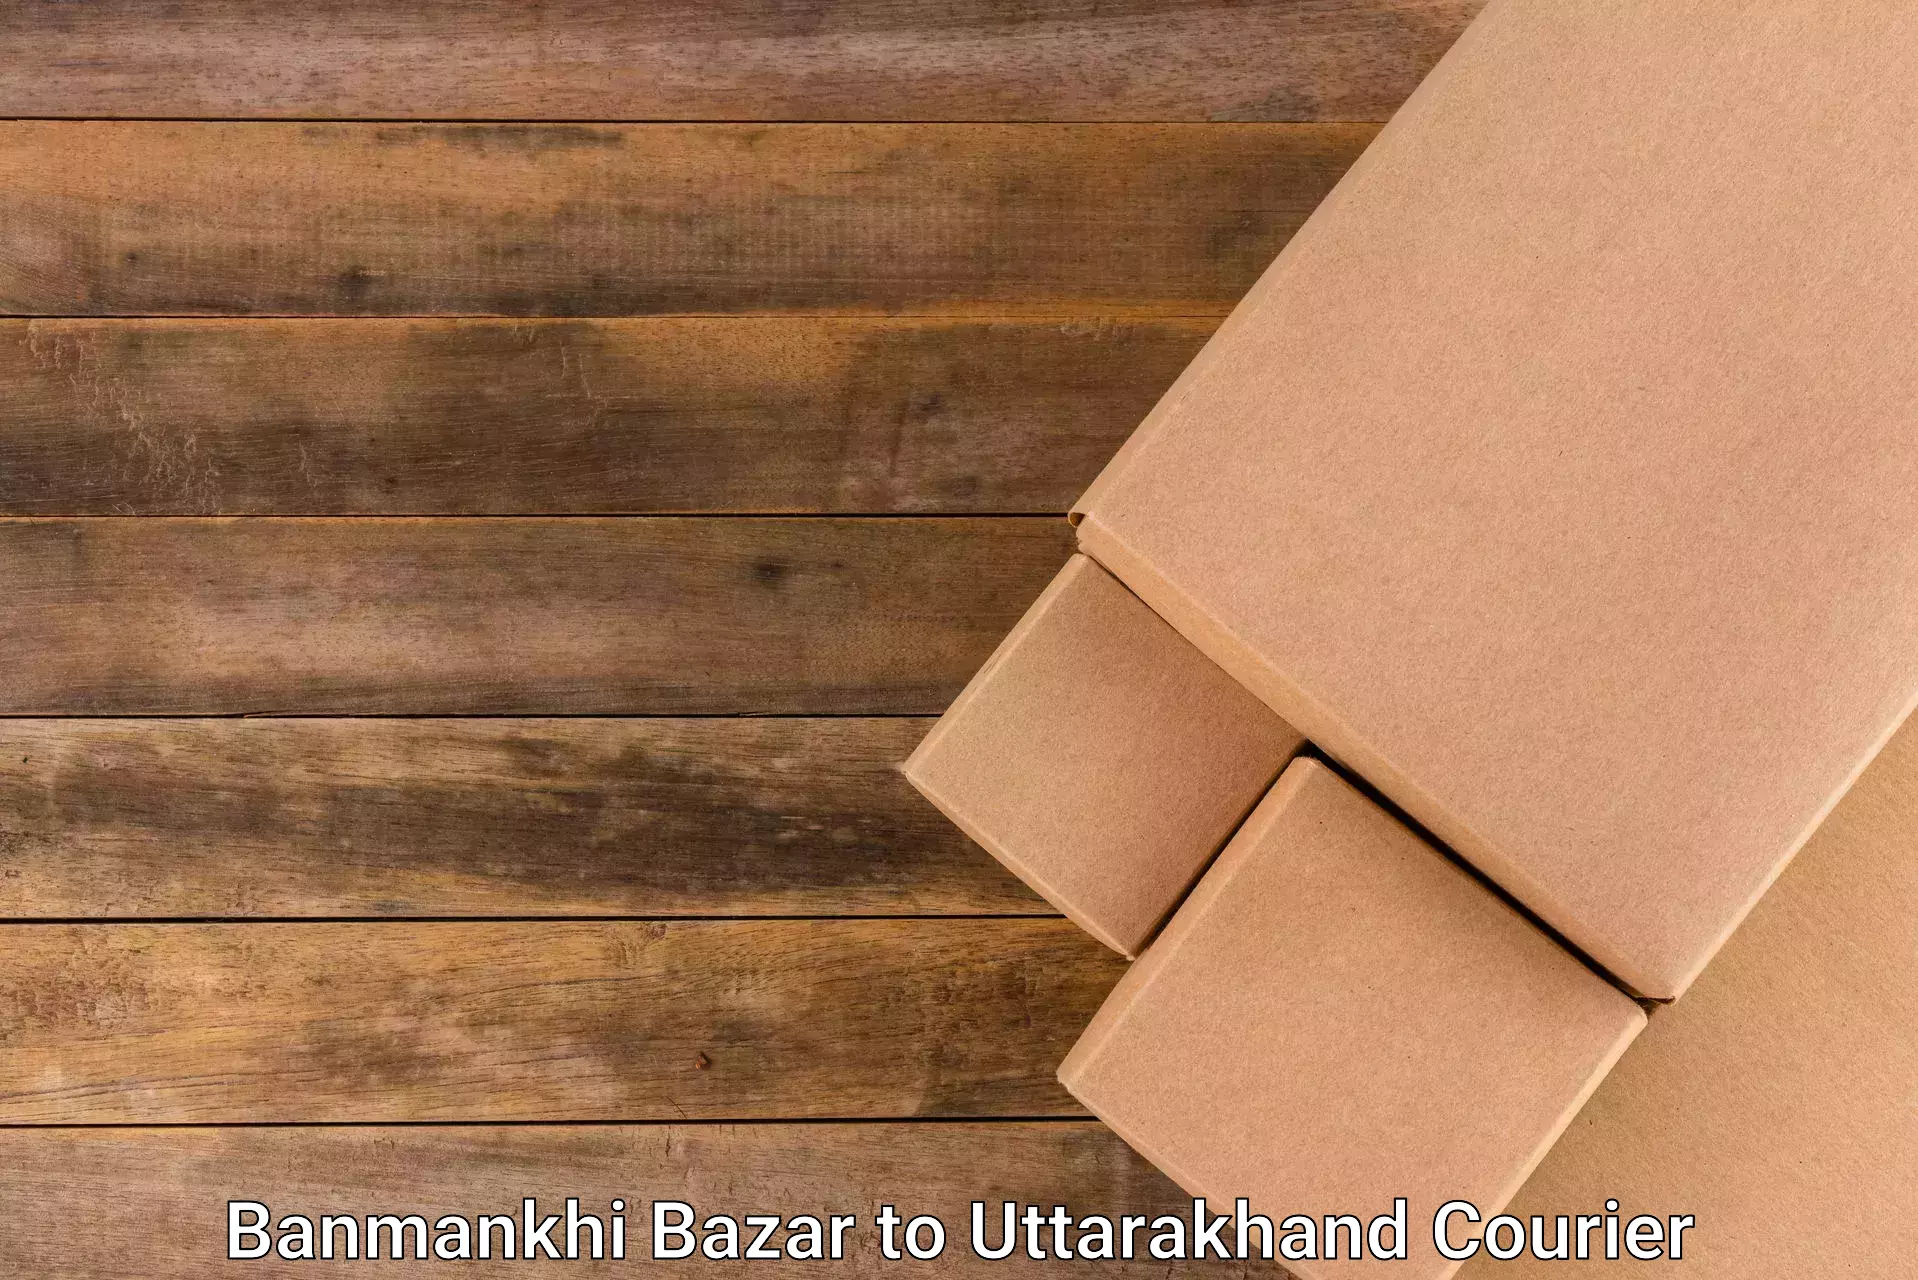 Express courier capabilities Banmankhi Bazar to Tehri